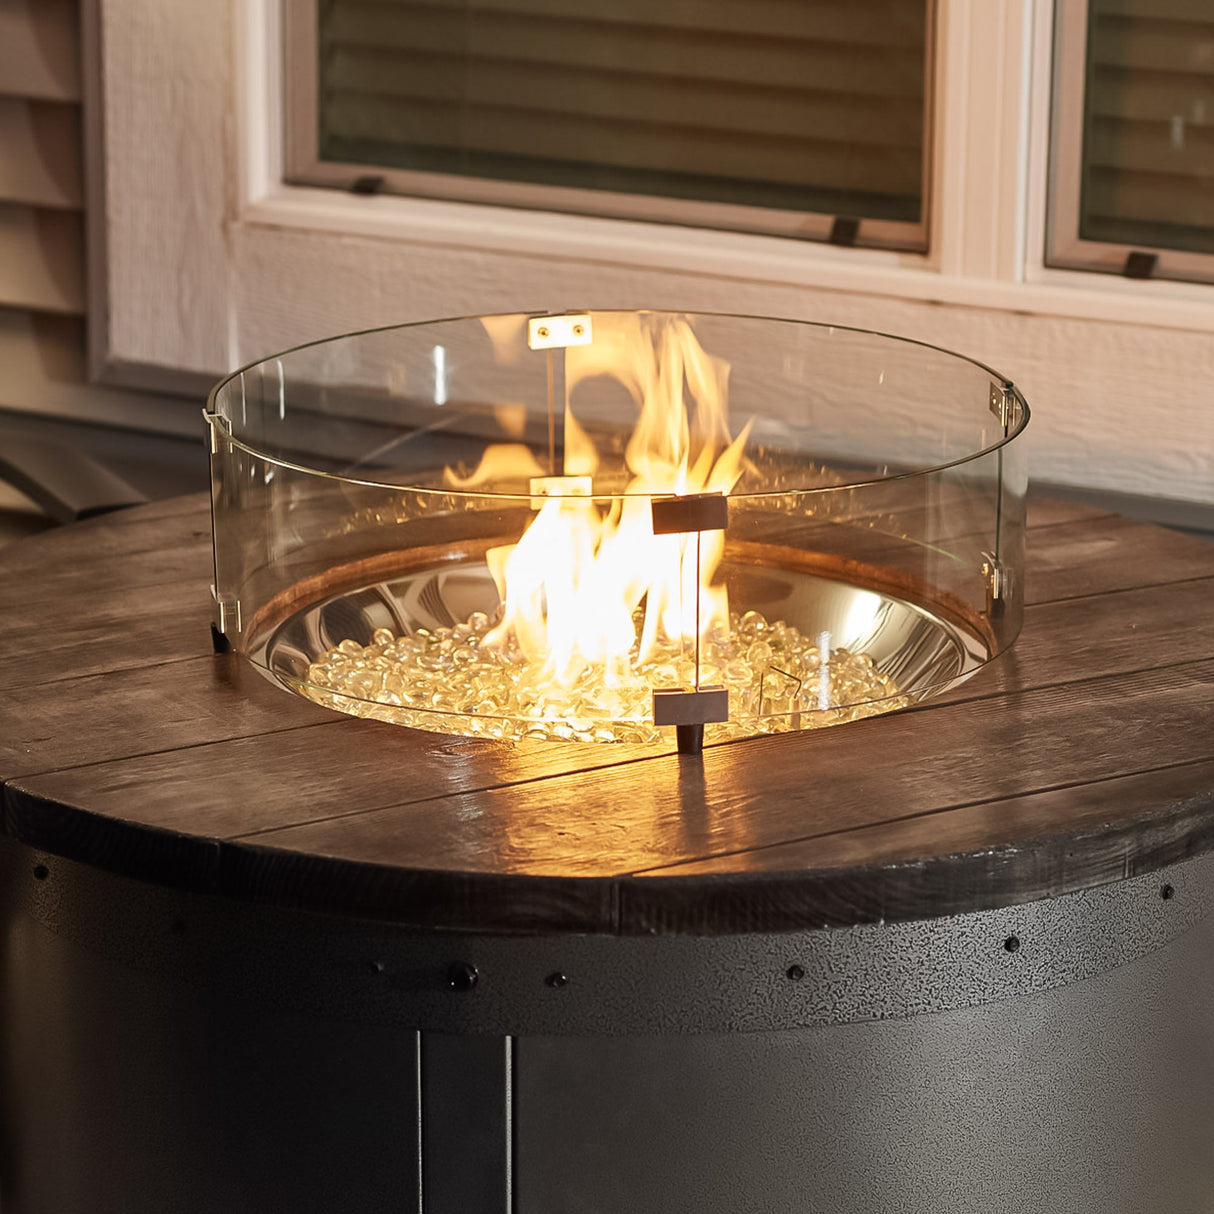 A glass wind guard placed on top of an Edison Round Gas Fire Pit Table, protecting the flame from the wind